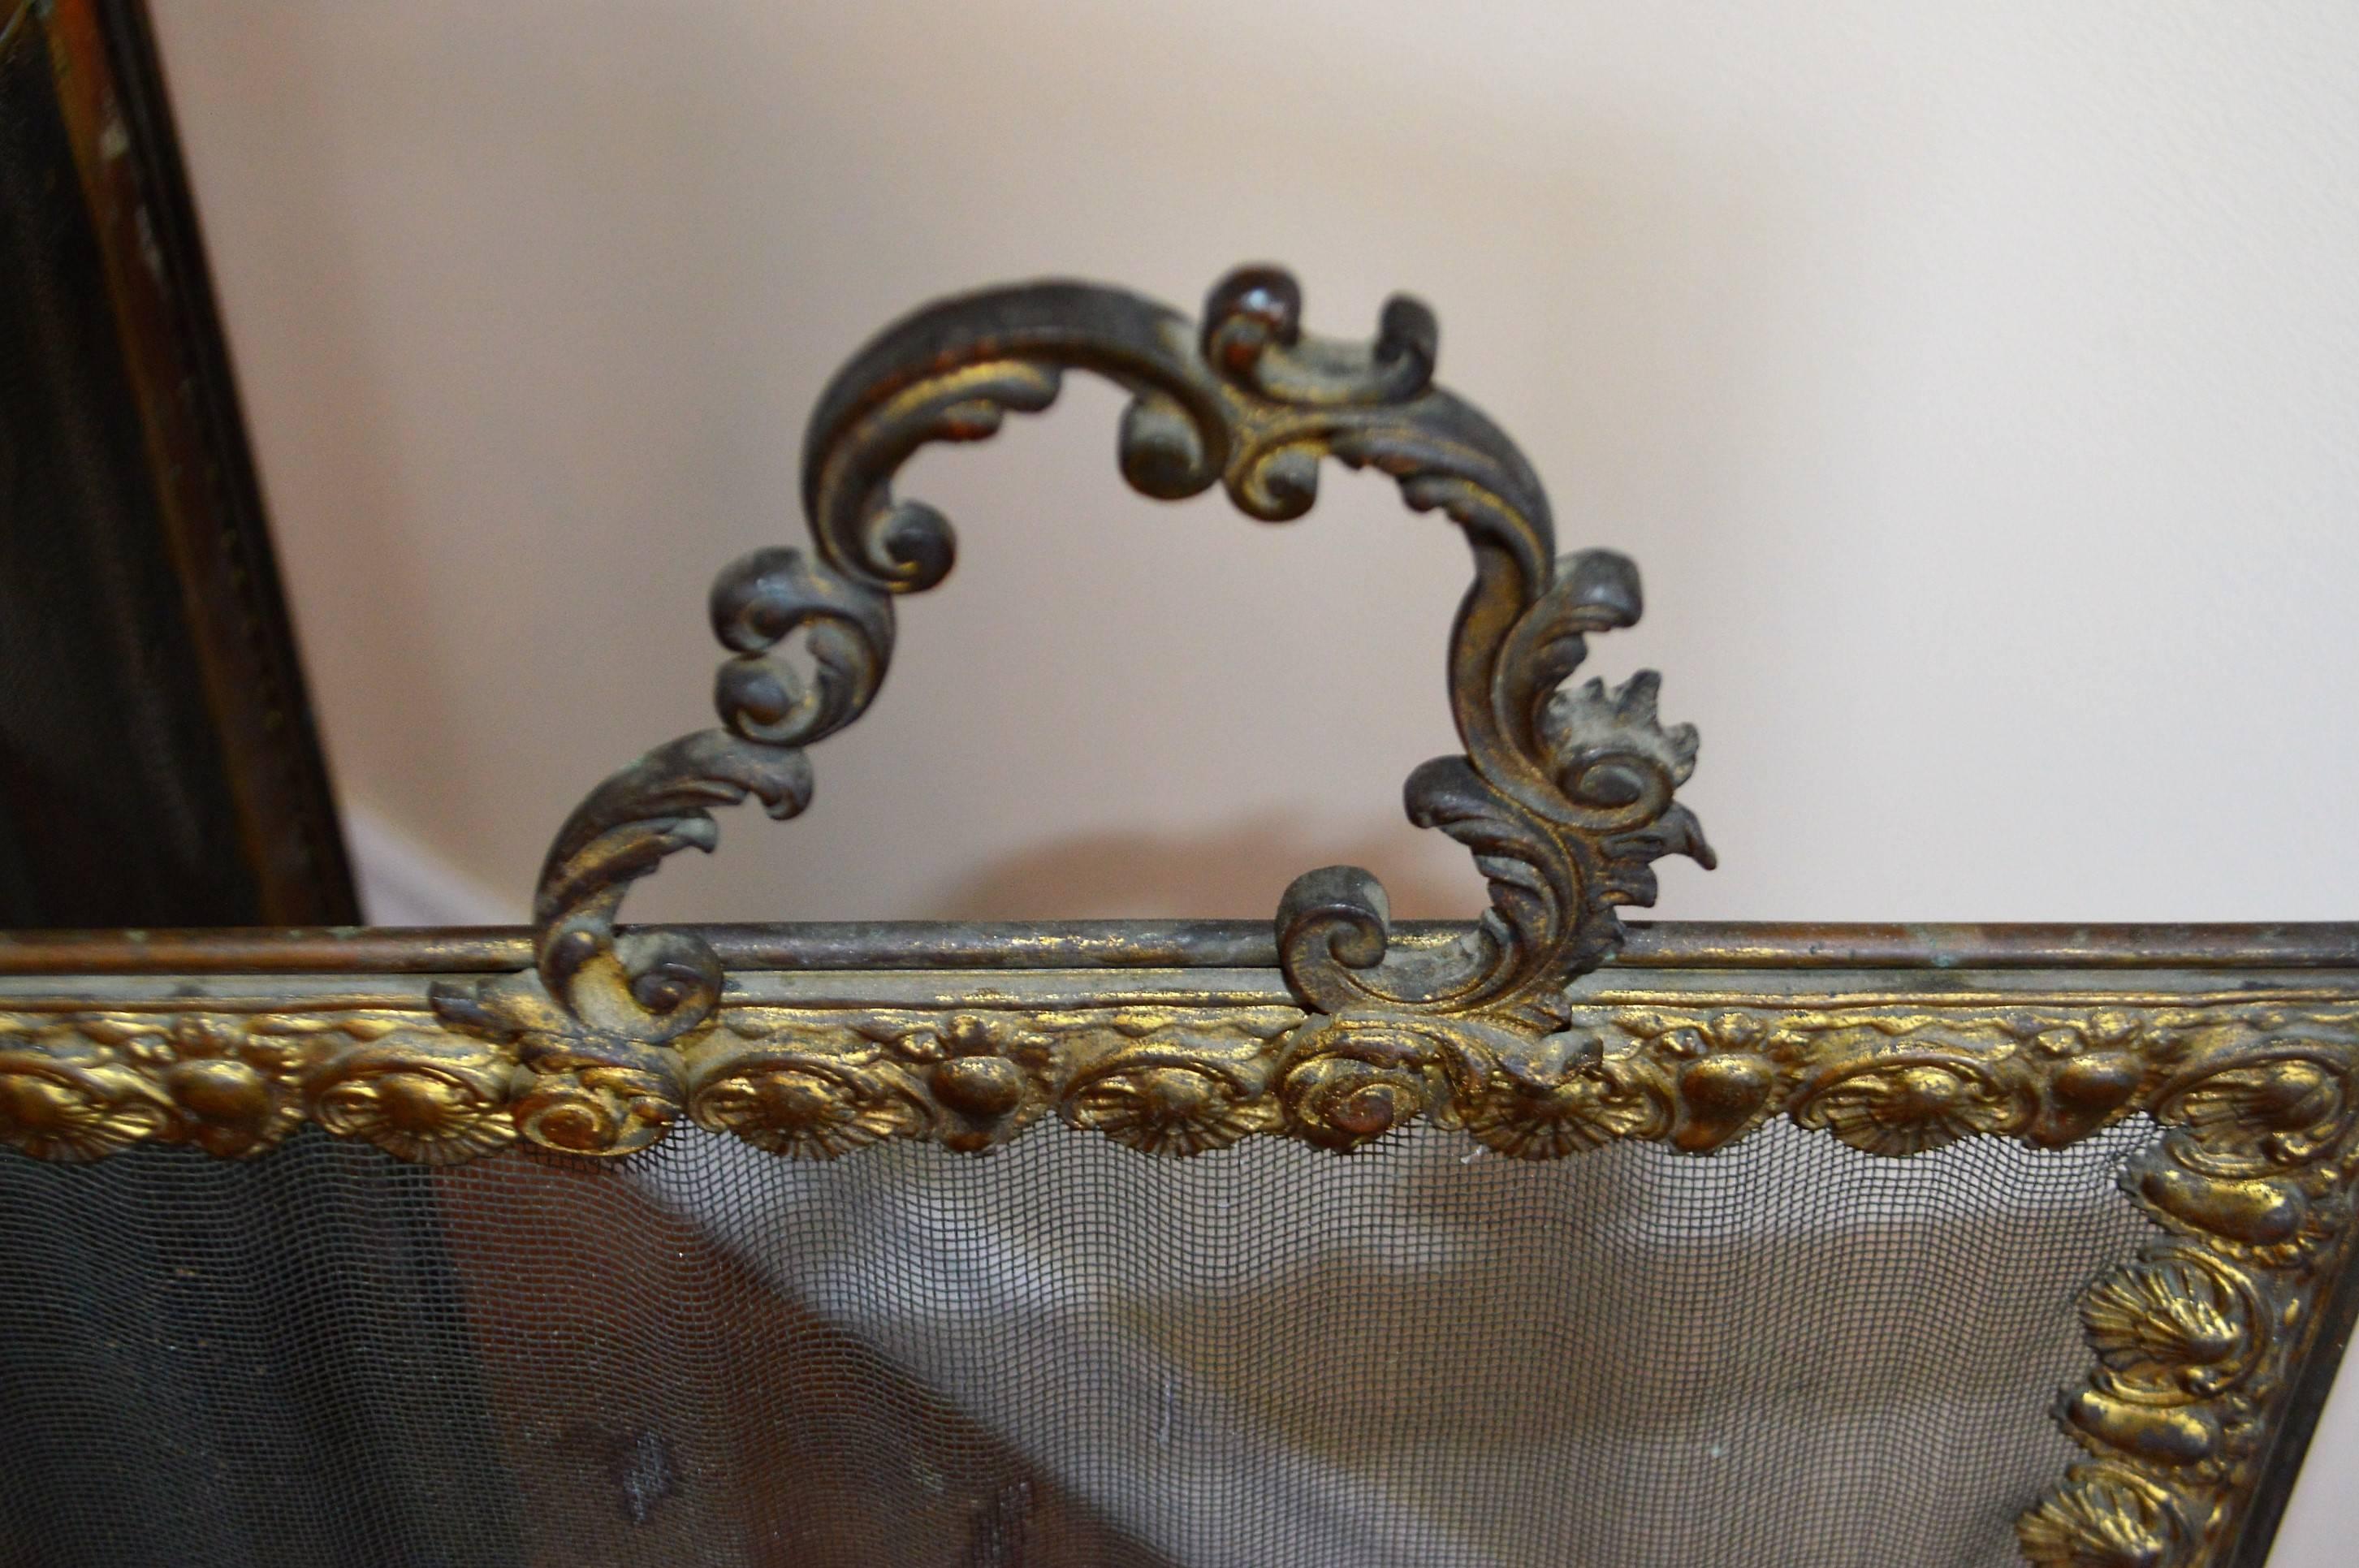 Lovely three sides folding fireplace screen with pretty bronze carved gilded decorative elements around the edge of the screen.